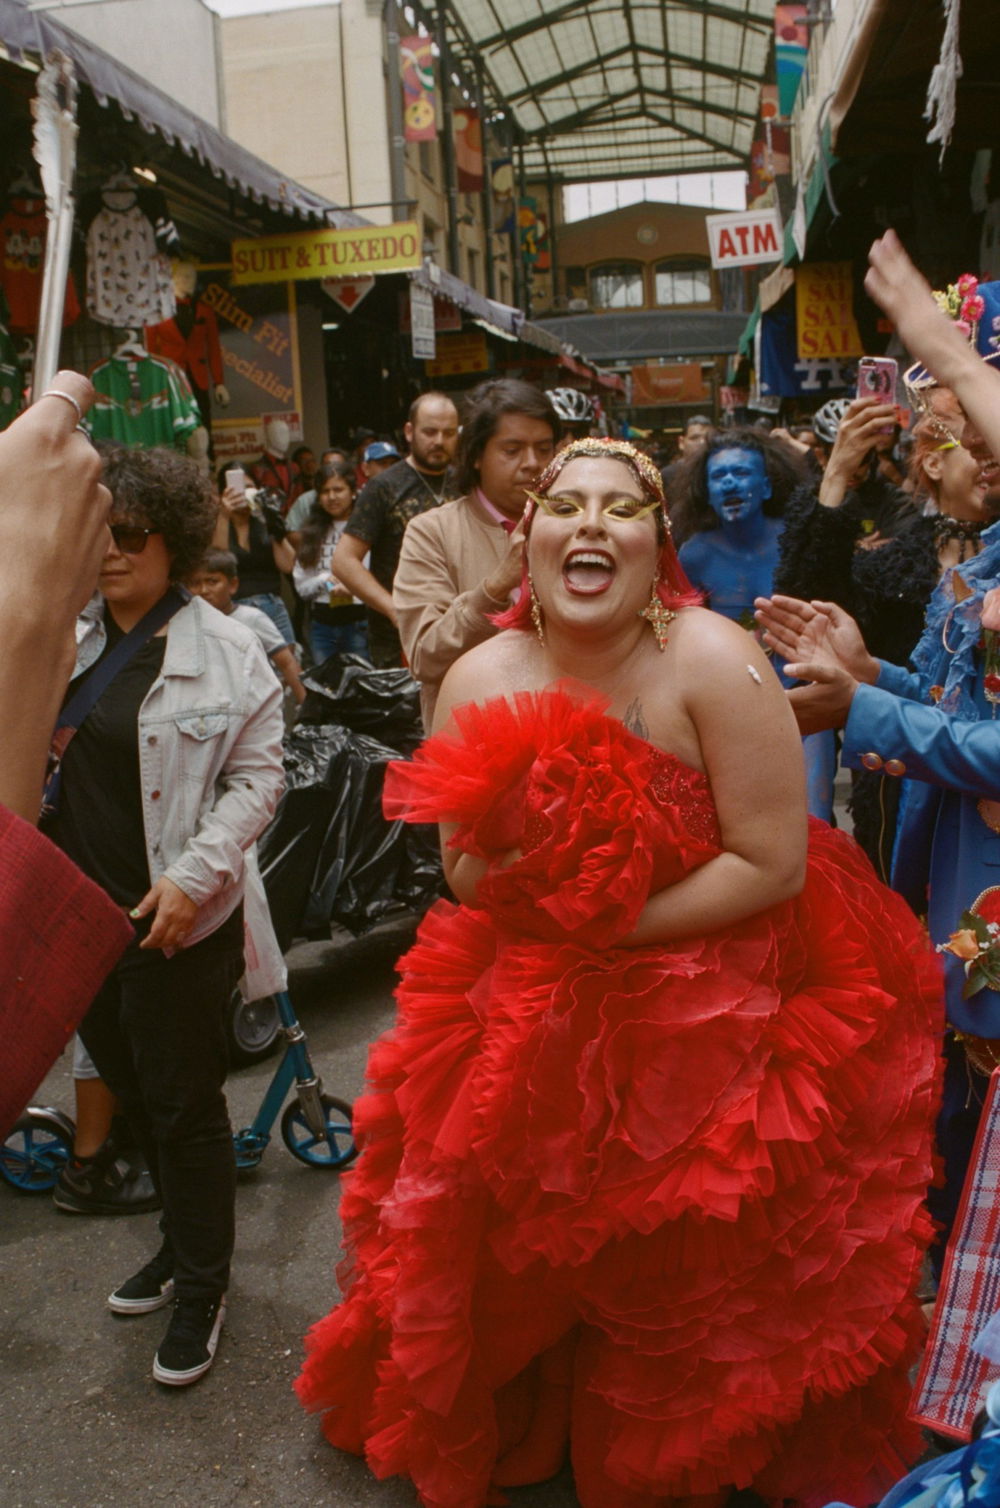 A woman in a bright red dress and matching lipstick smiles widely, surrounded by other people in a covered pedestrian boulevard.